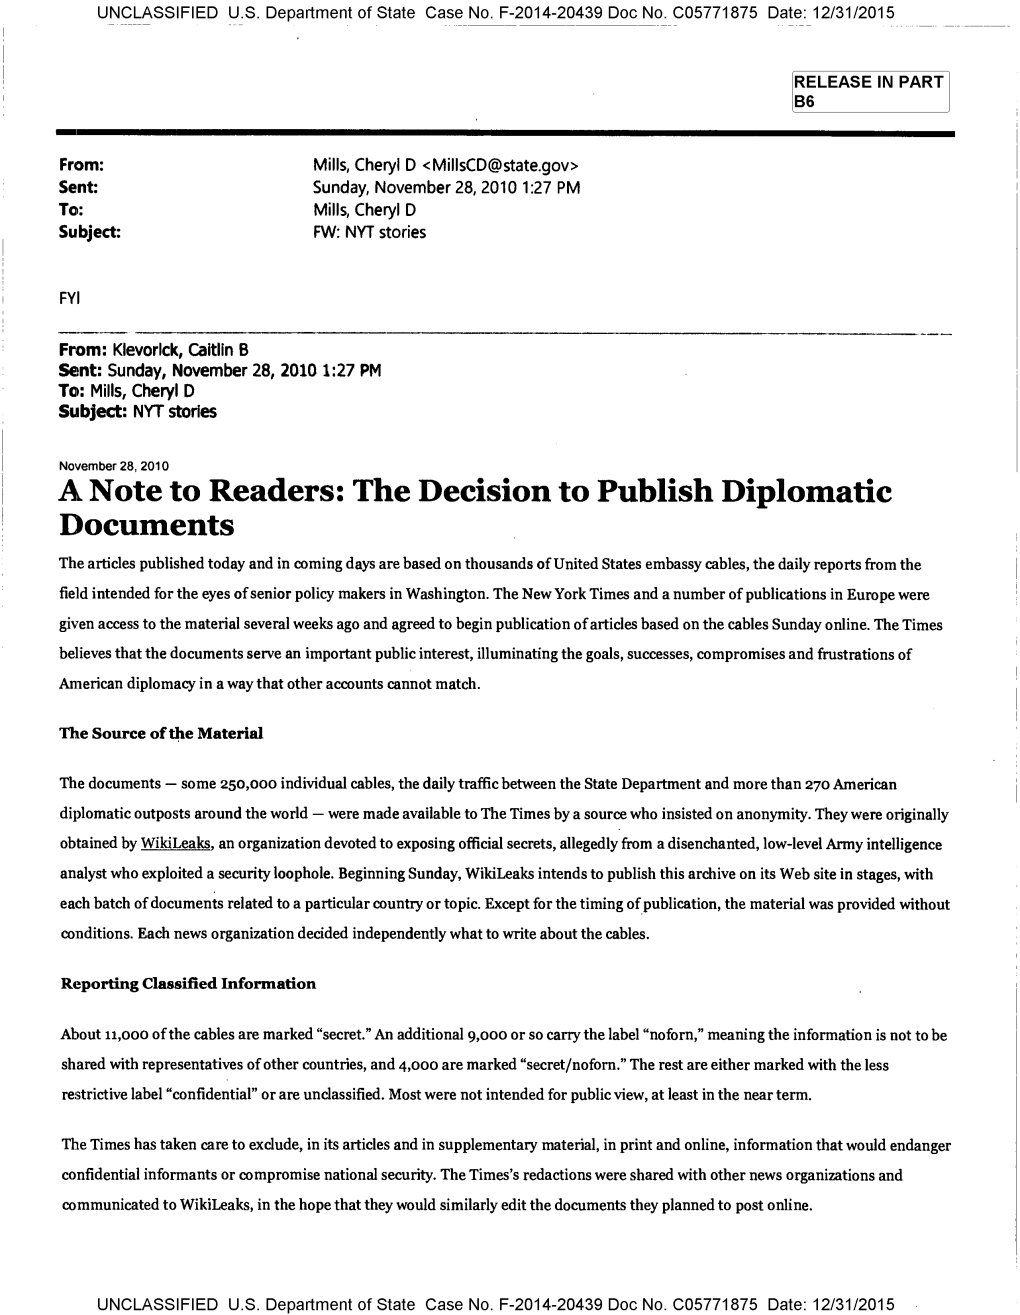 A Note to Readers: the Decision to Publish Diplomatic